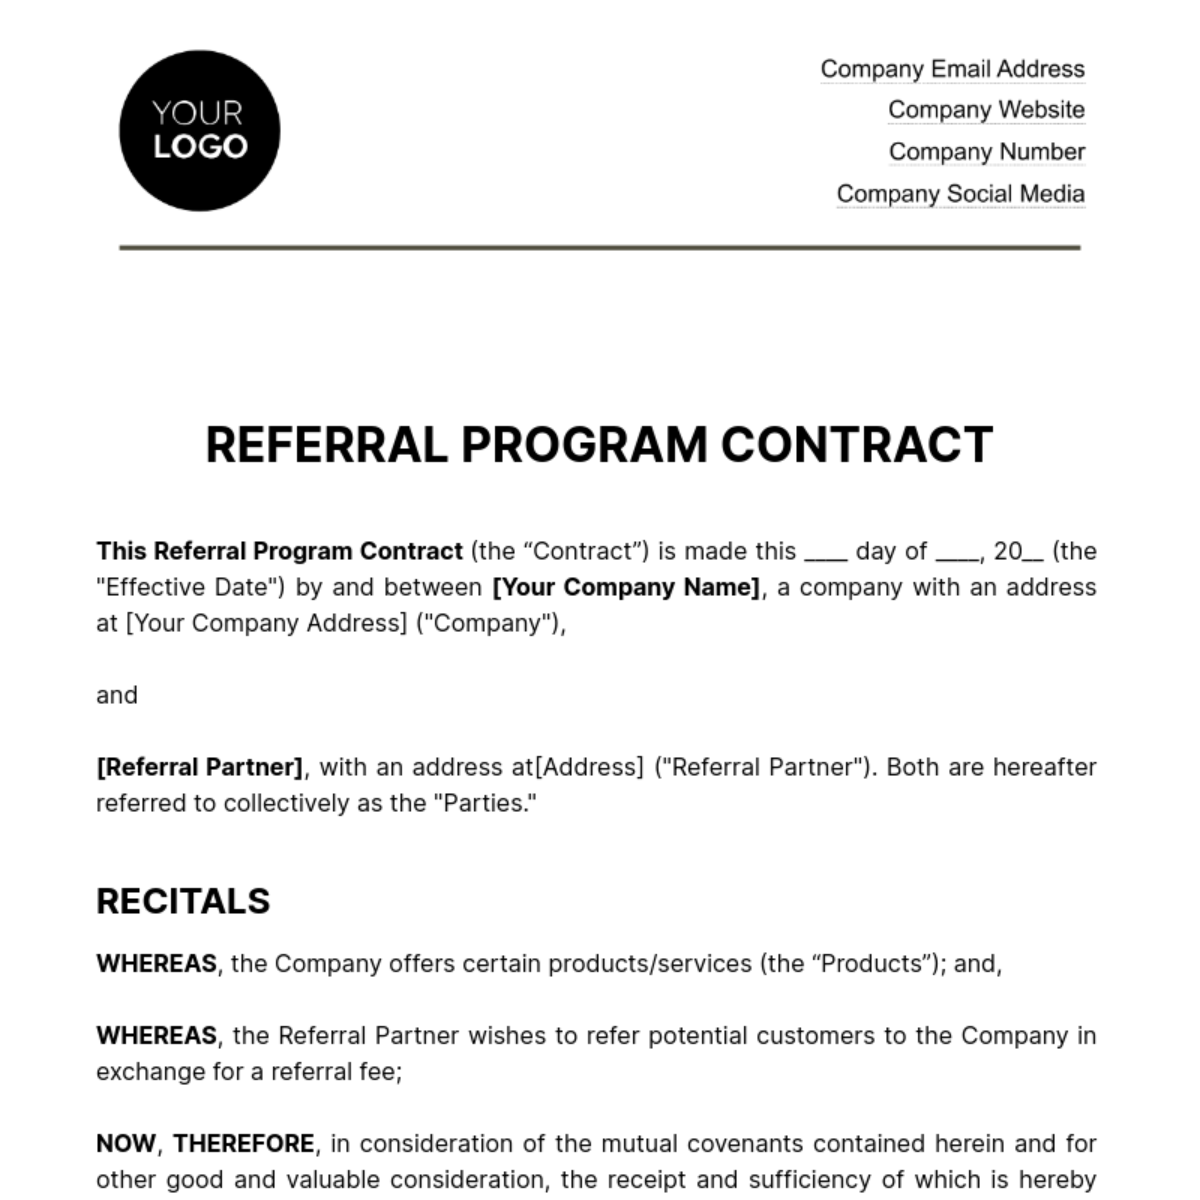 Free Referral Program Contract HR Template